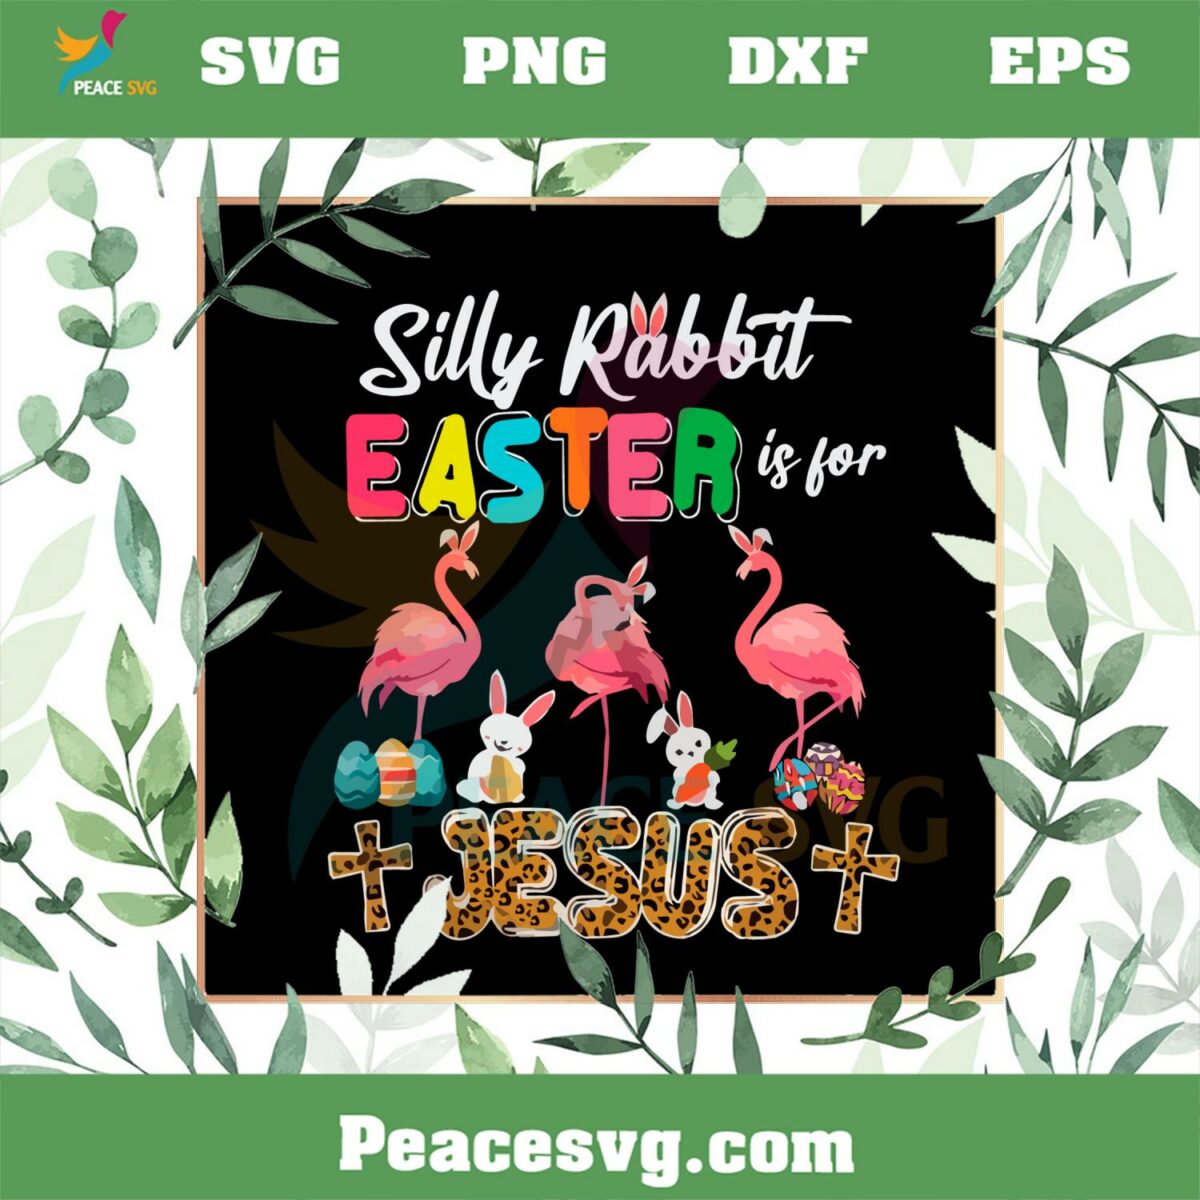 Silly Rabbit Easter Is For Jesus Bunny Flamingos SVG Cutting Files